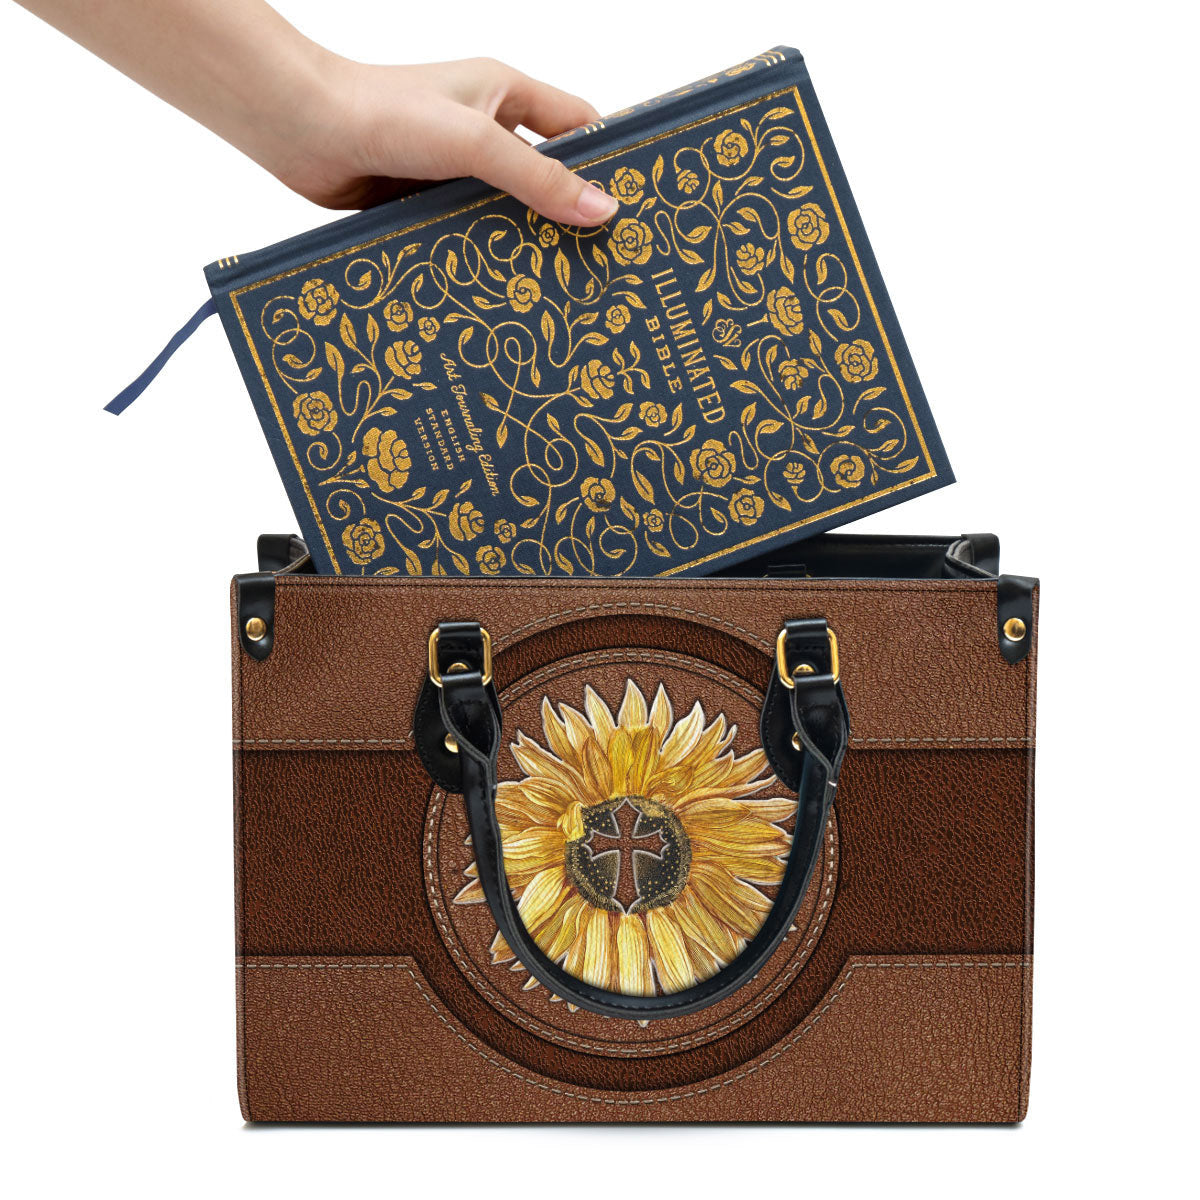 Sunflower Leather Handbag, Religious Gifts For Women, Women Pu Leather Bag